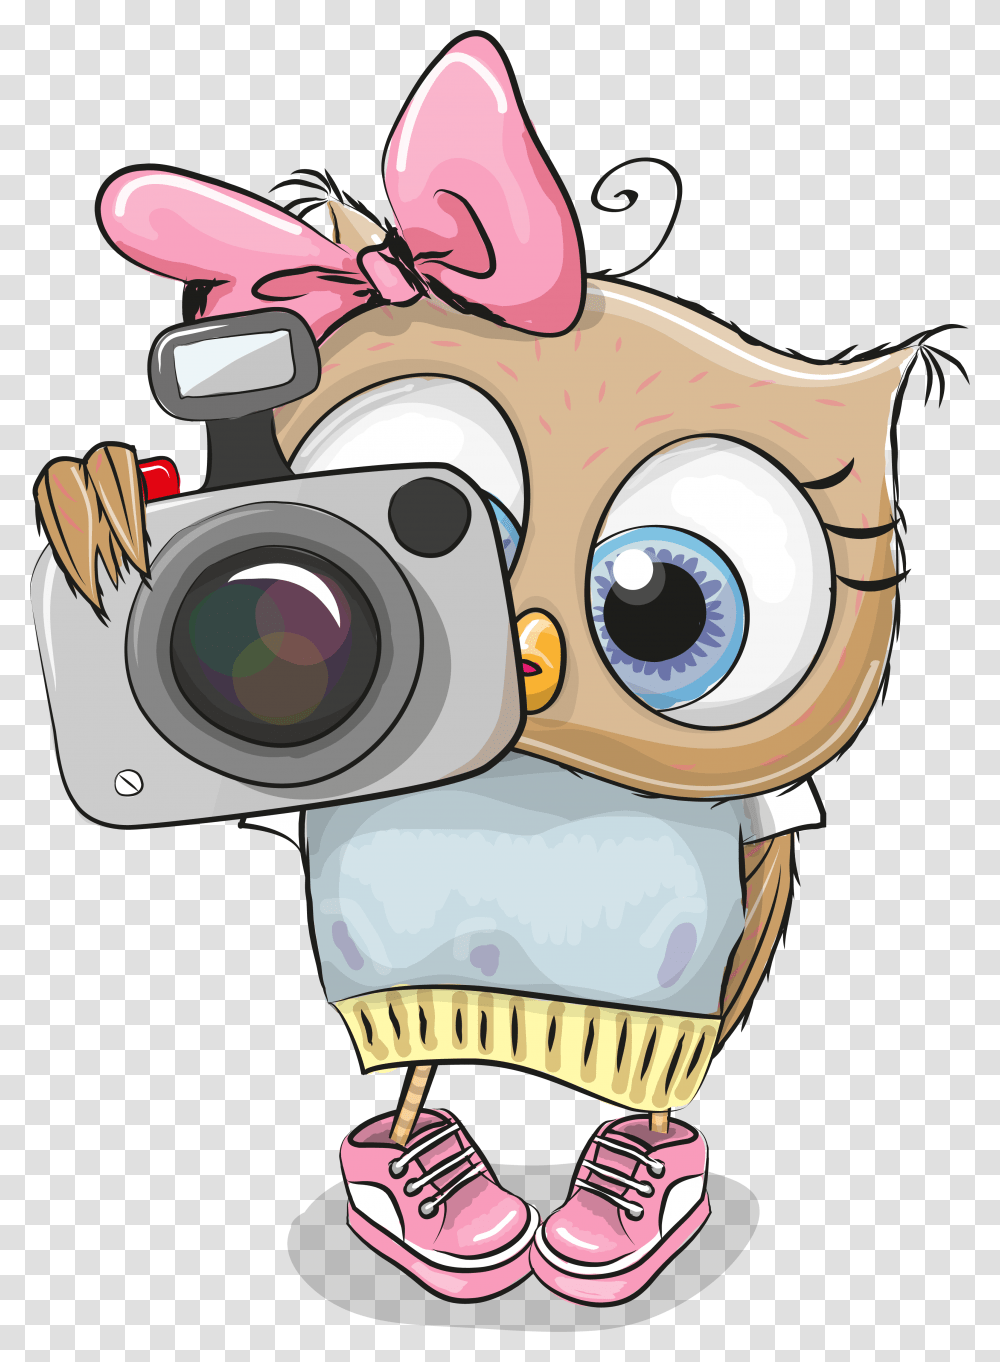 Pin By Wizard On Cute Cartoon Owl, Camera, Electronics, Helmet Transparent Png